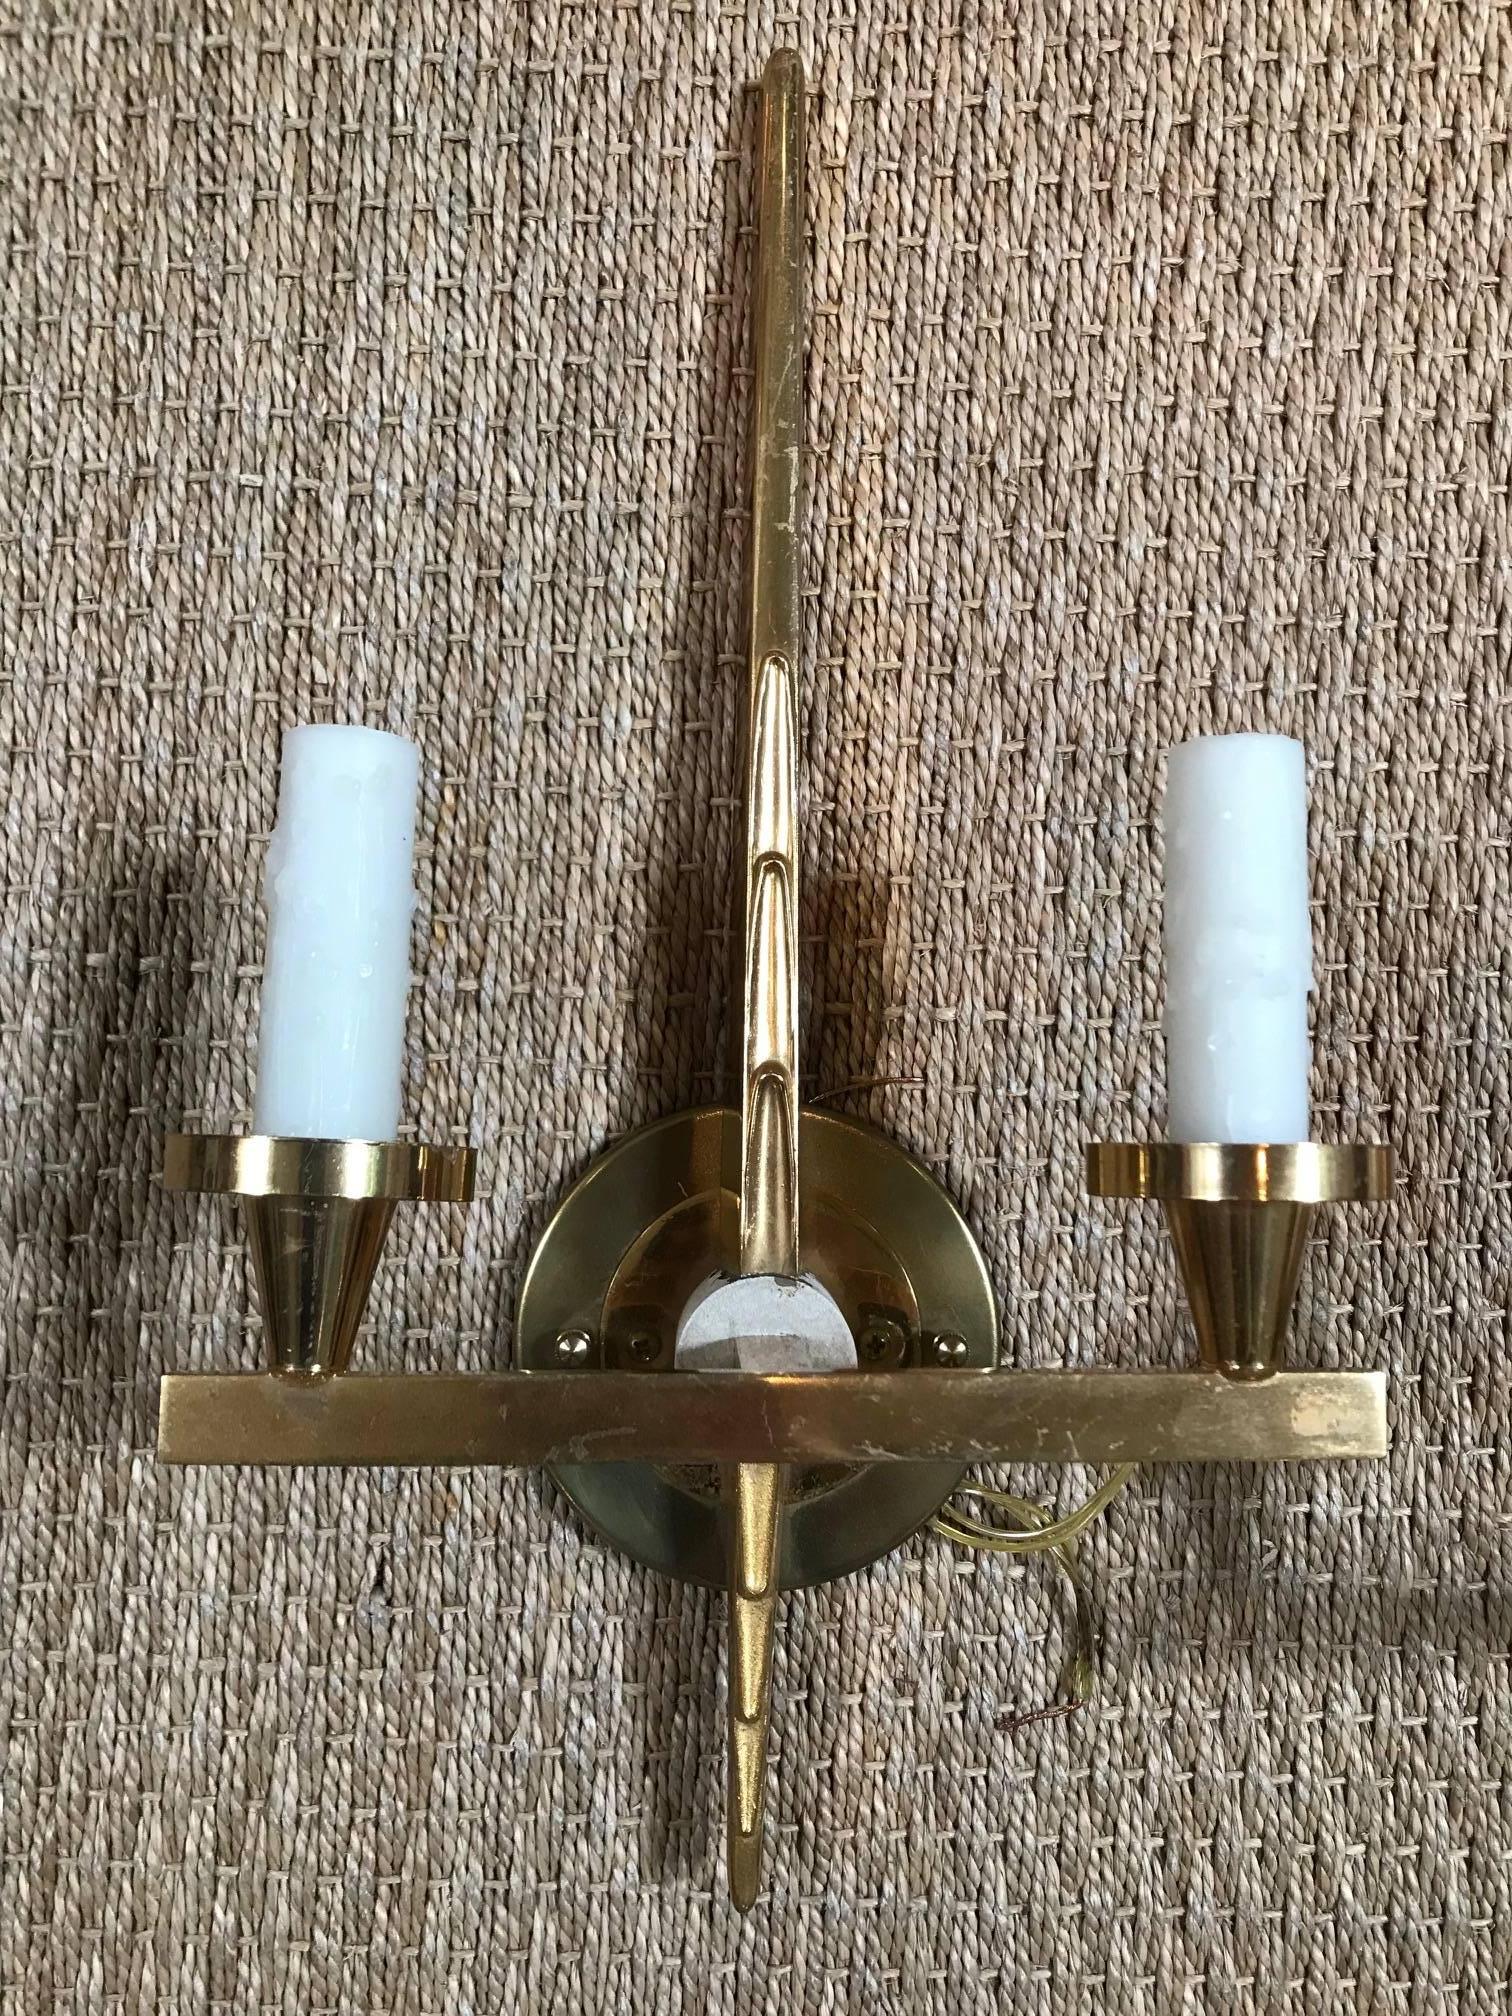 Newly wired golden sconces with plastic, wax candles.